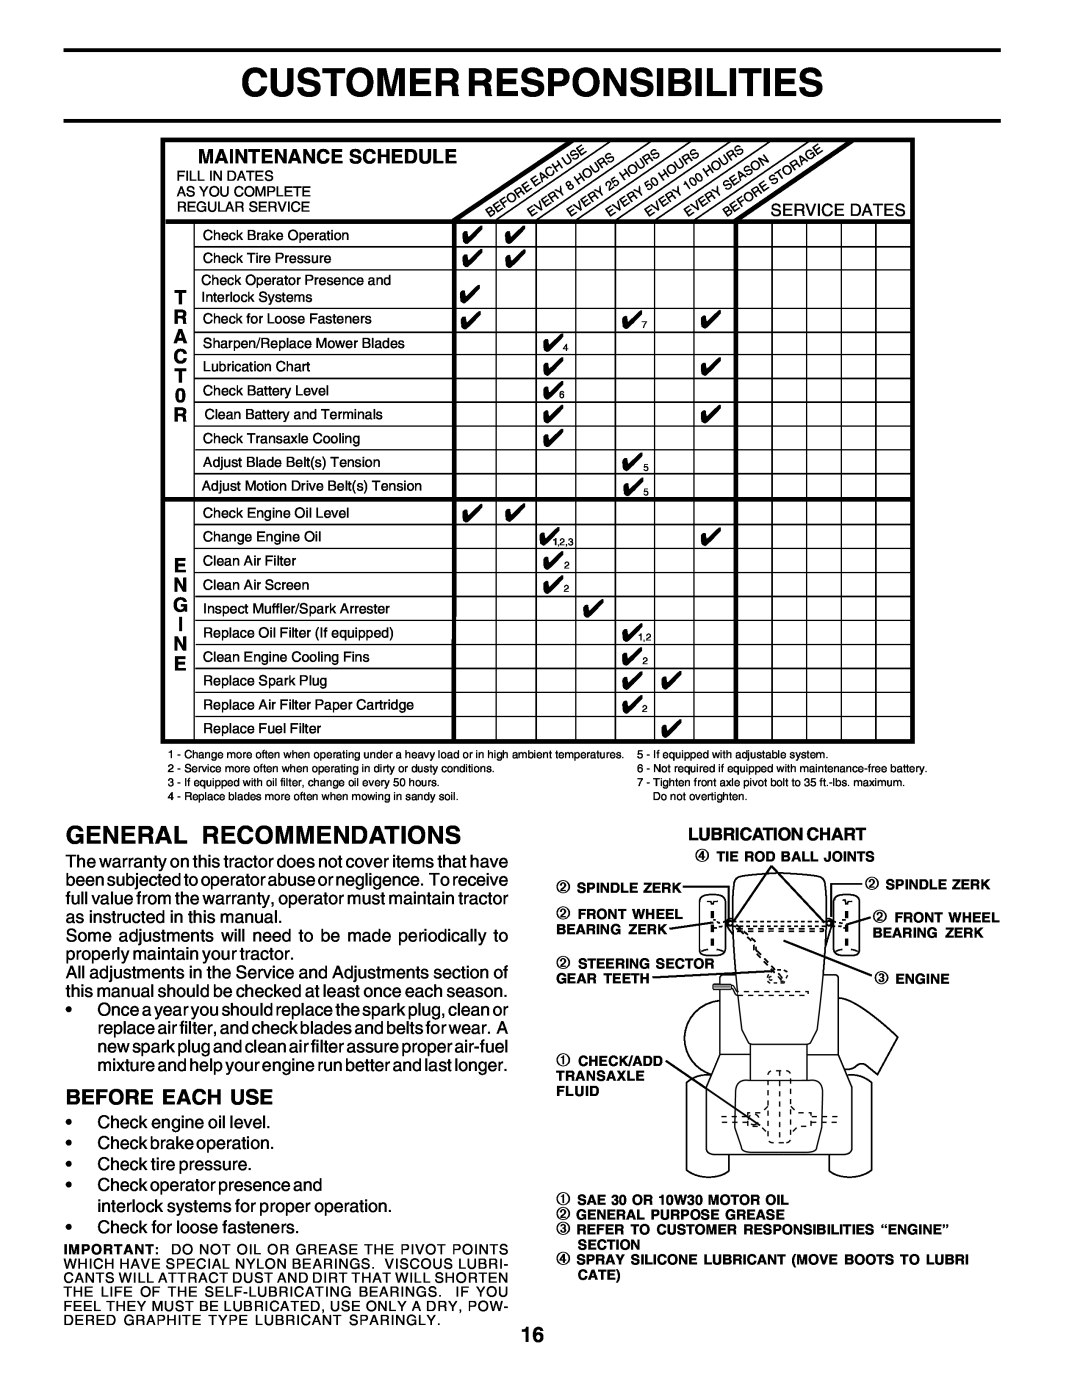 Poulan 177271 owner manual Customer Responsibilities, General Recommendations, Before Each Use, Maintenance Schedule 